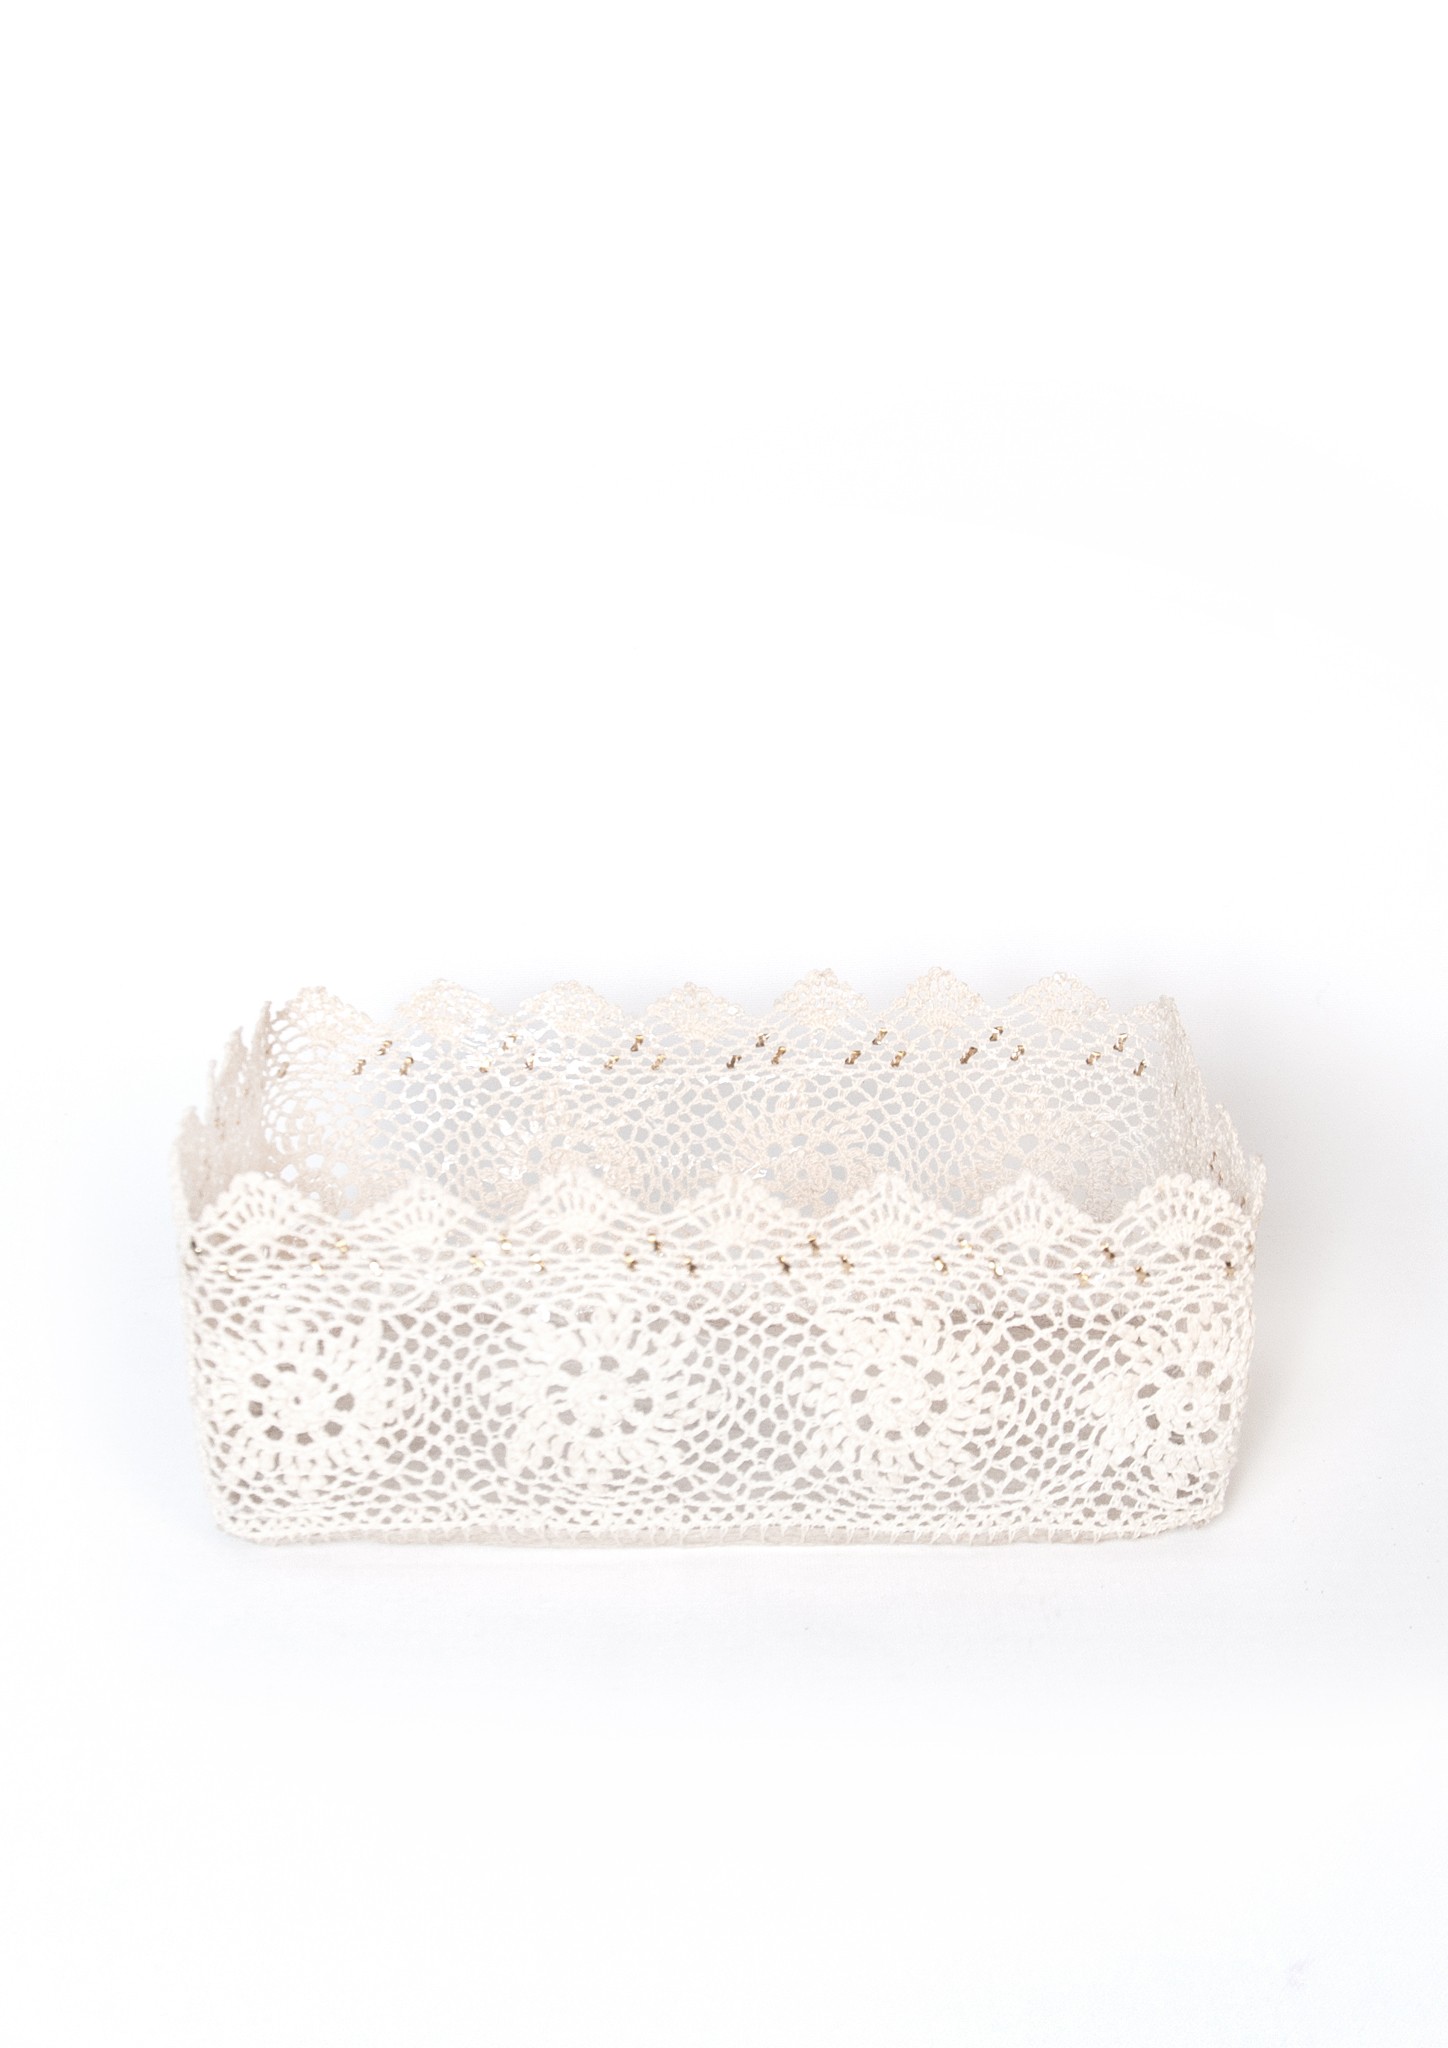 Embroidered Lace Basket